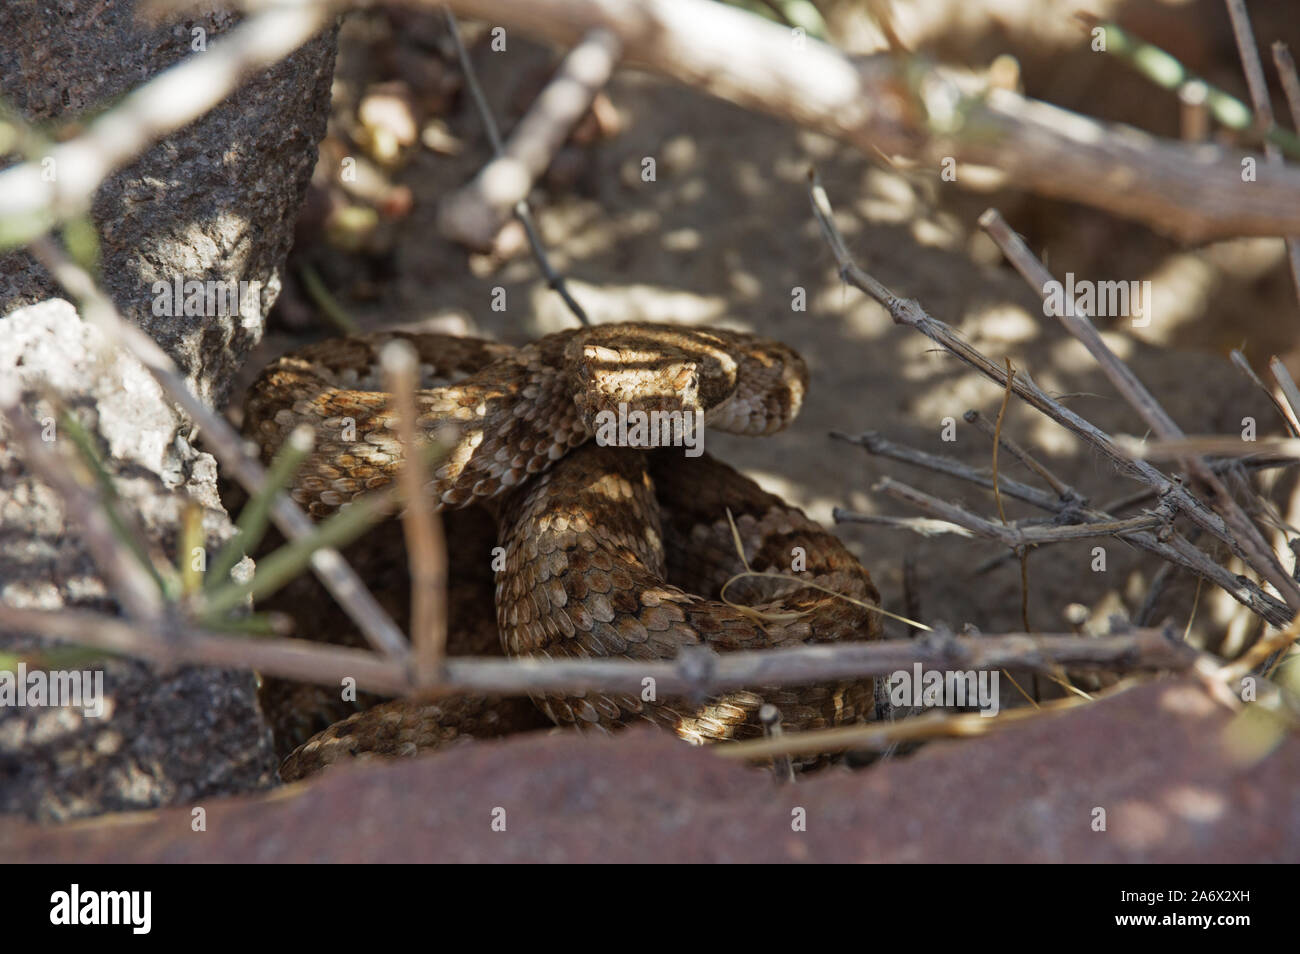 rattlesnake coiled up hiding behind rocks and twigs Stock Photo